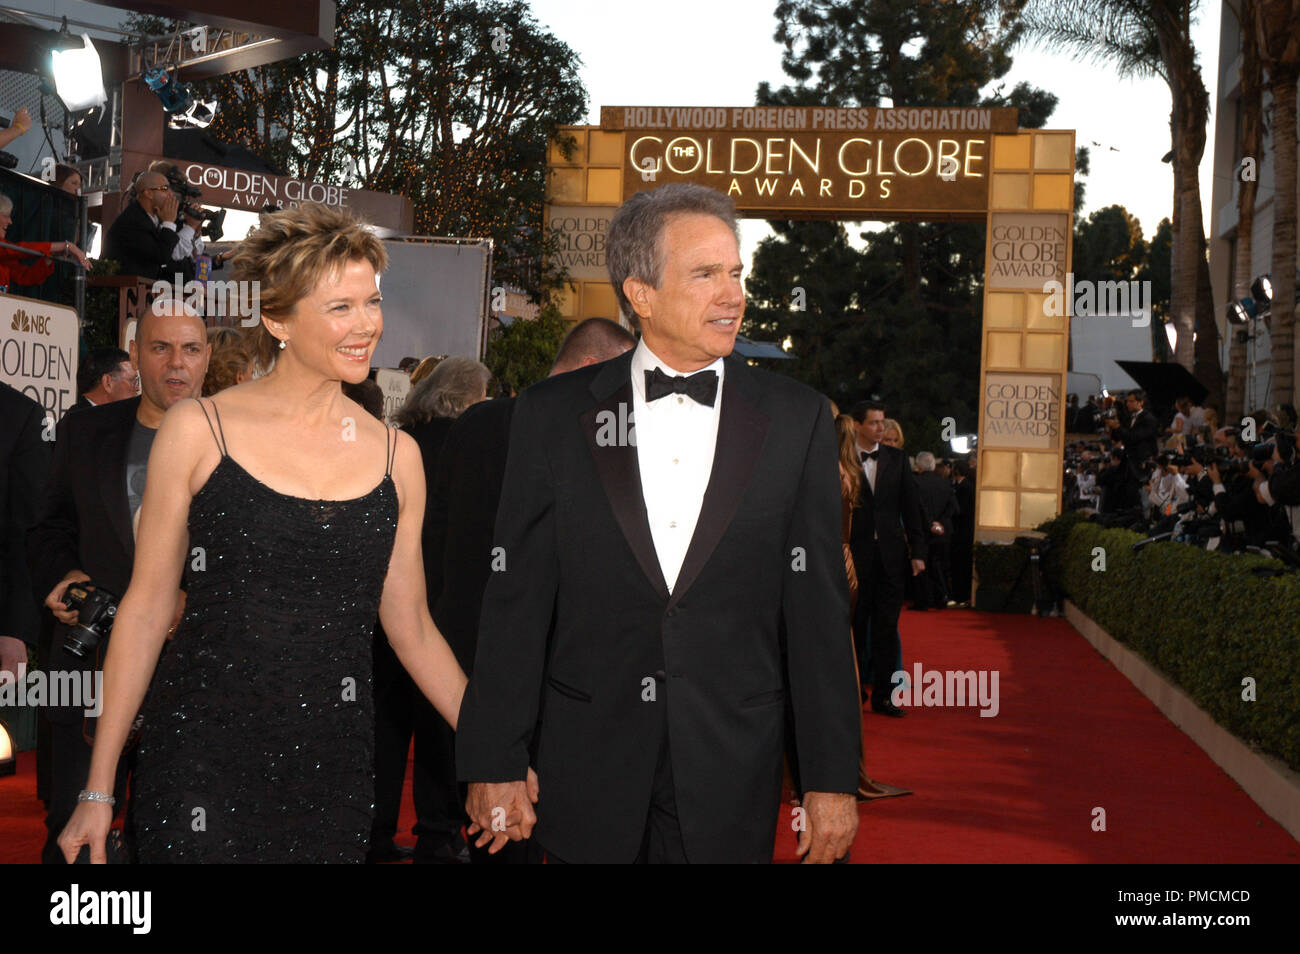 Arrivals at the  'Golden Globe Awards - 62nd Annual' Annette Bening, Warren Beatty 1-16-2005  File Reference # 1080 084PLX  For Editorial Use Only - Stock Photo